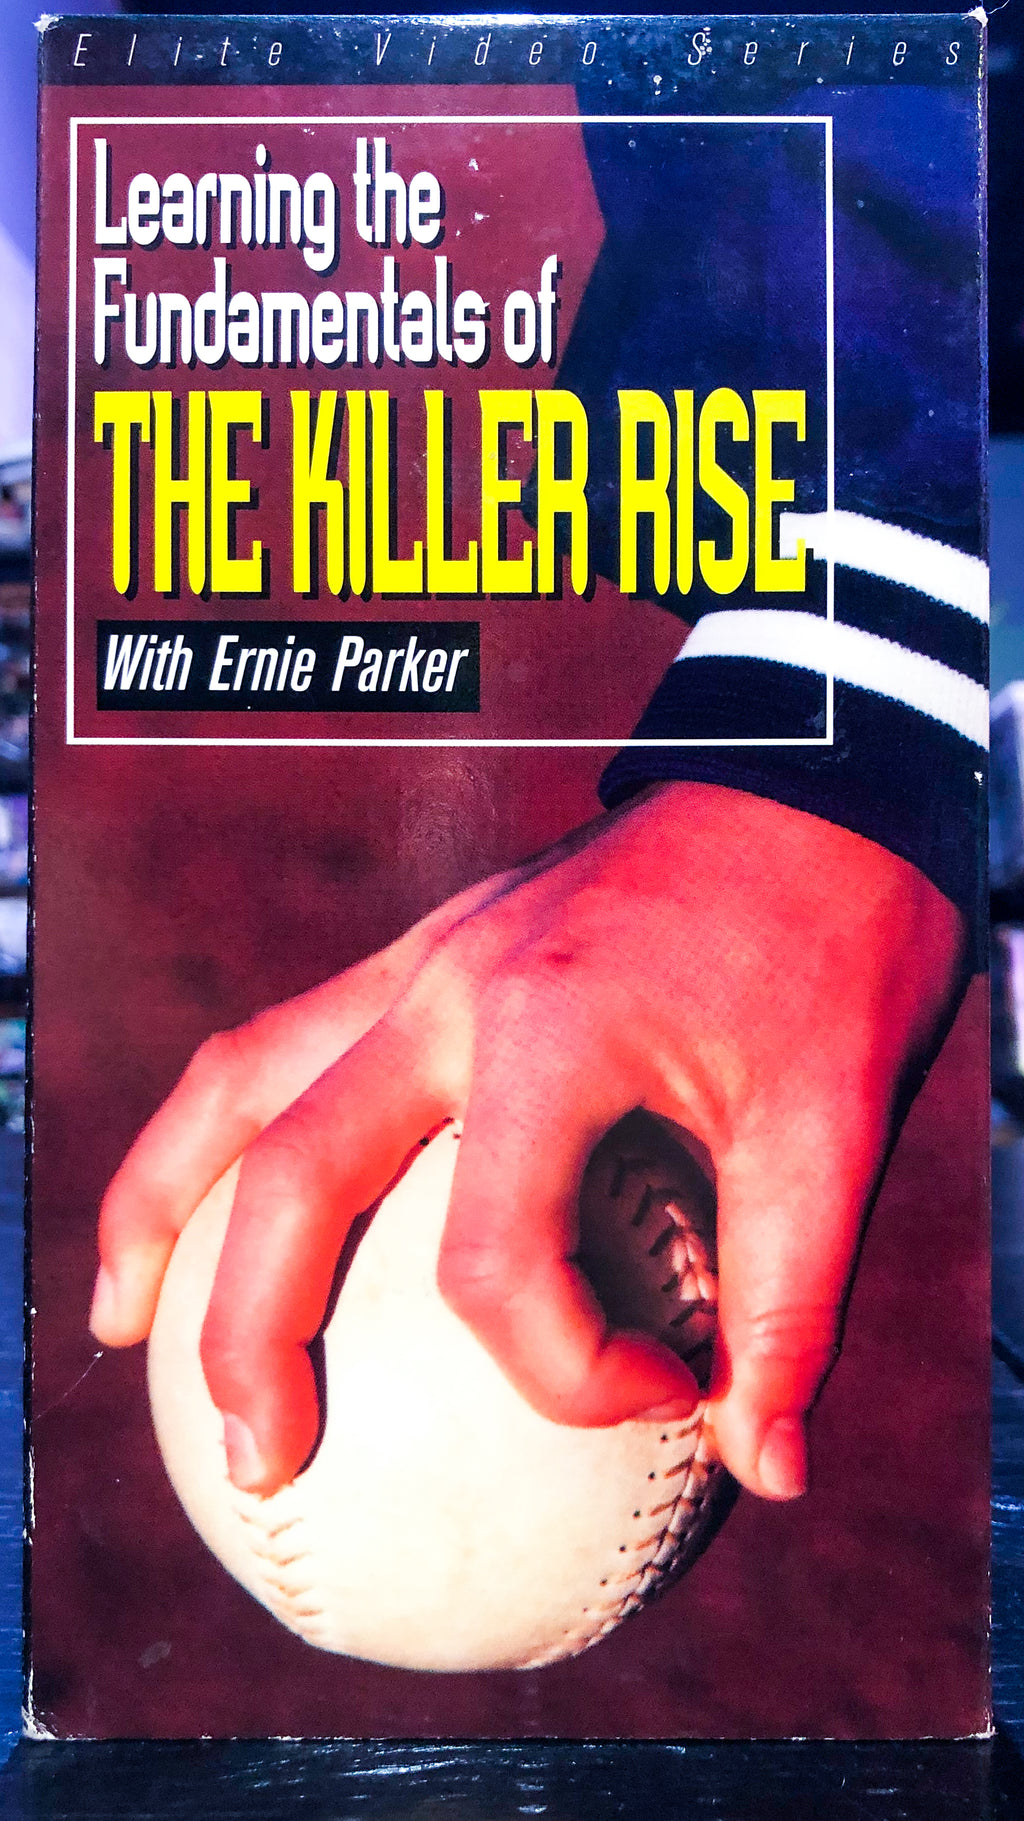 Learning the Fundamentals of the Killer Rise with Ernie Parker